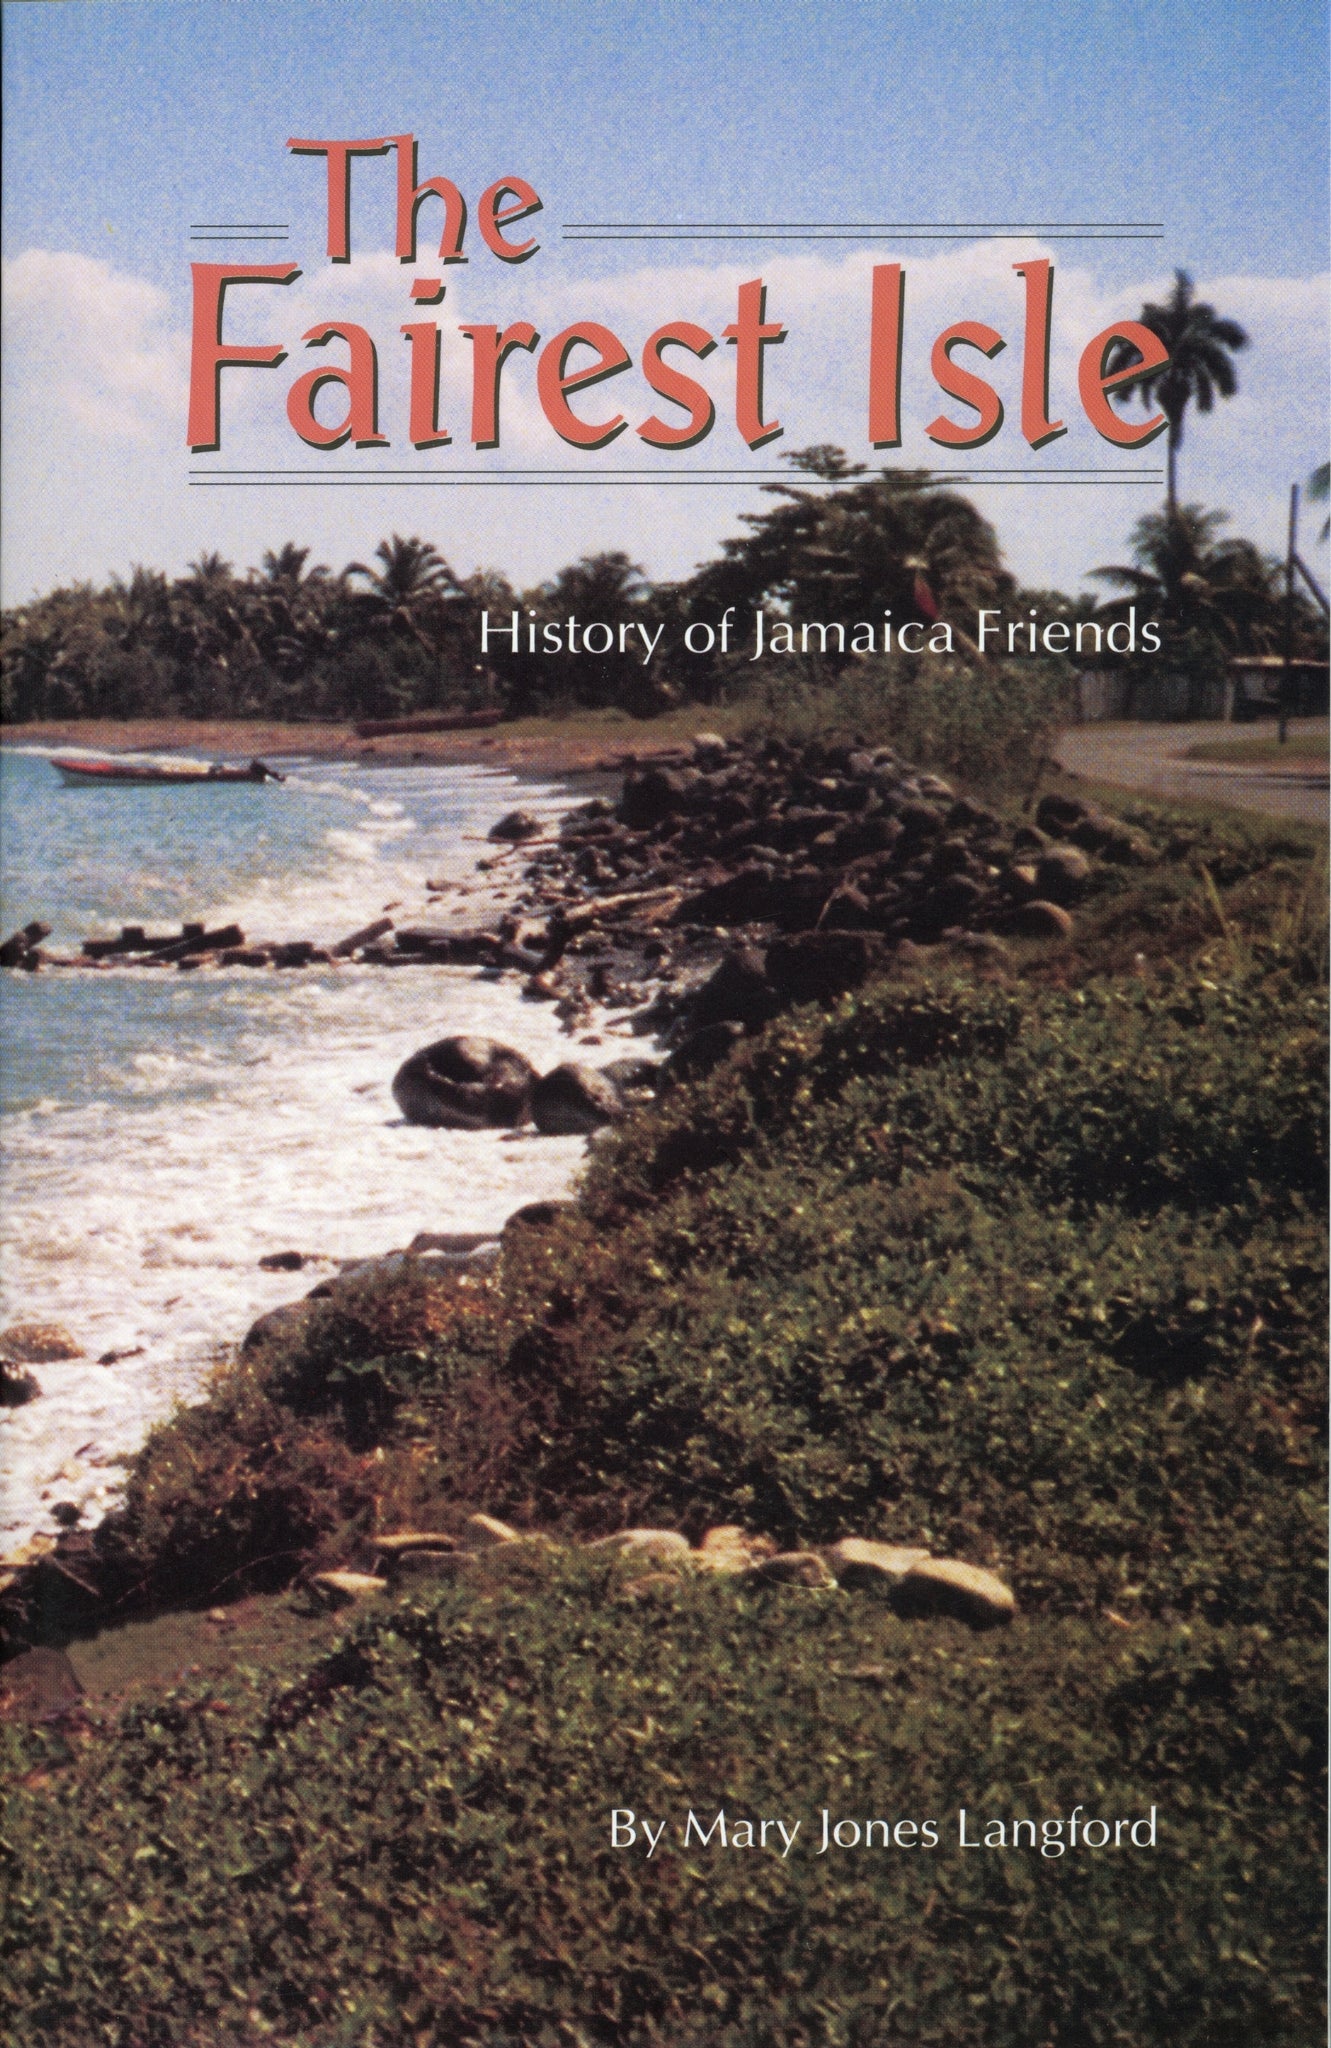 Fairest Isle: History of Jamaica Friends